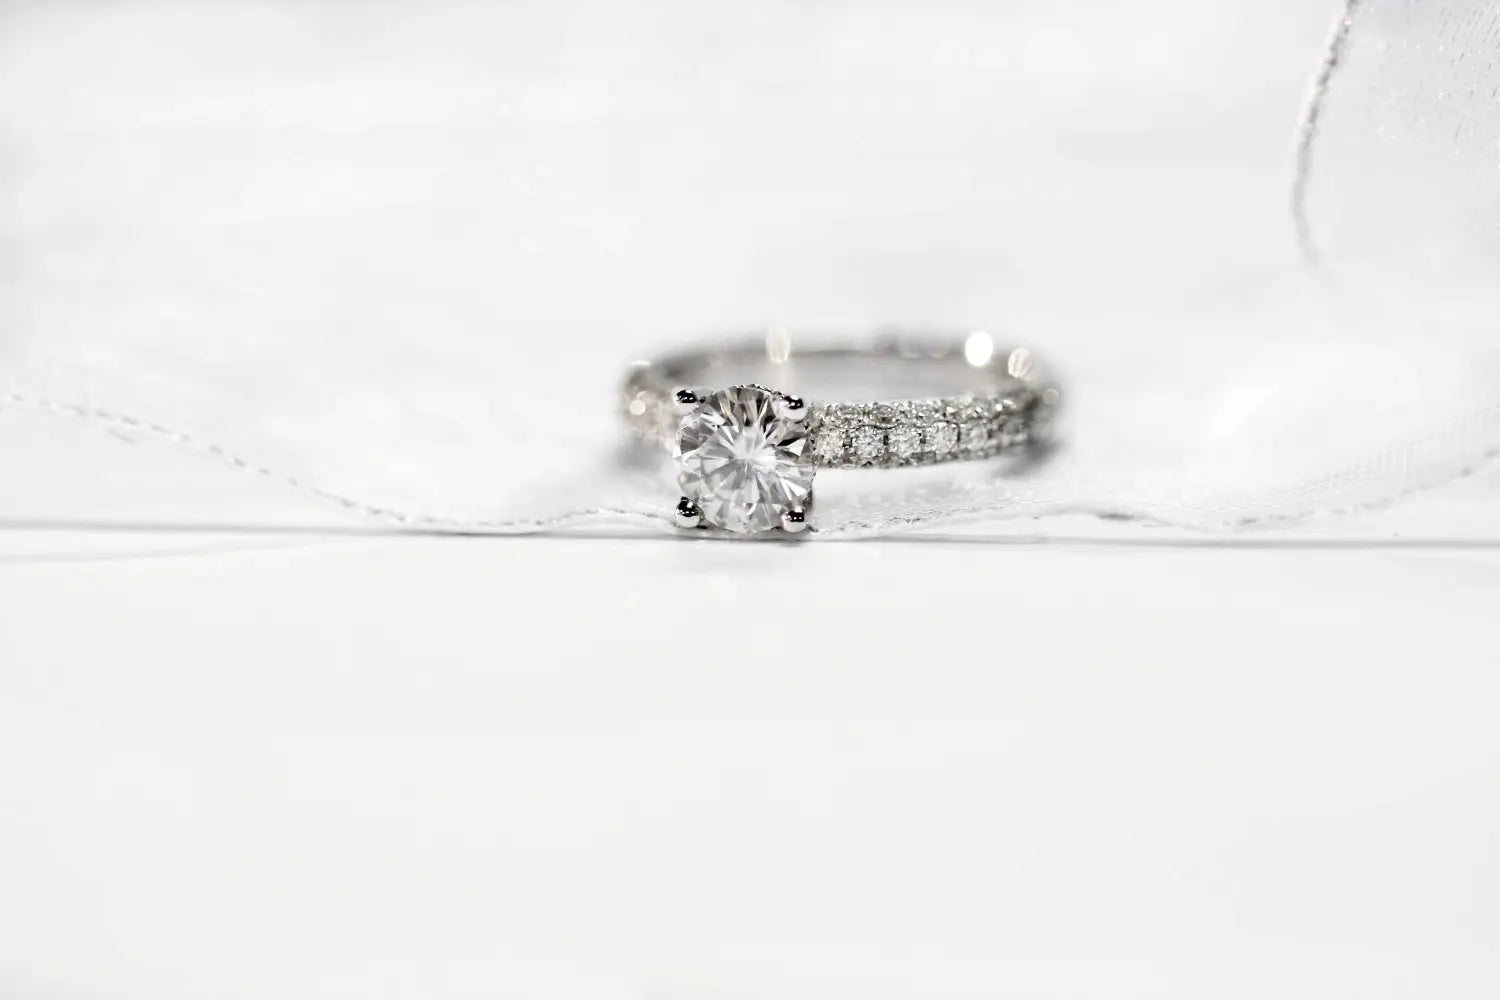 How to keep your Moissanite engagement ring clean